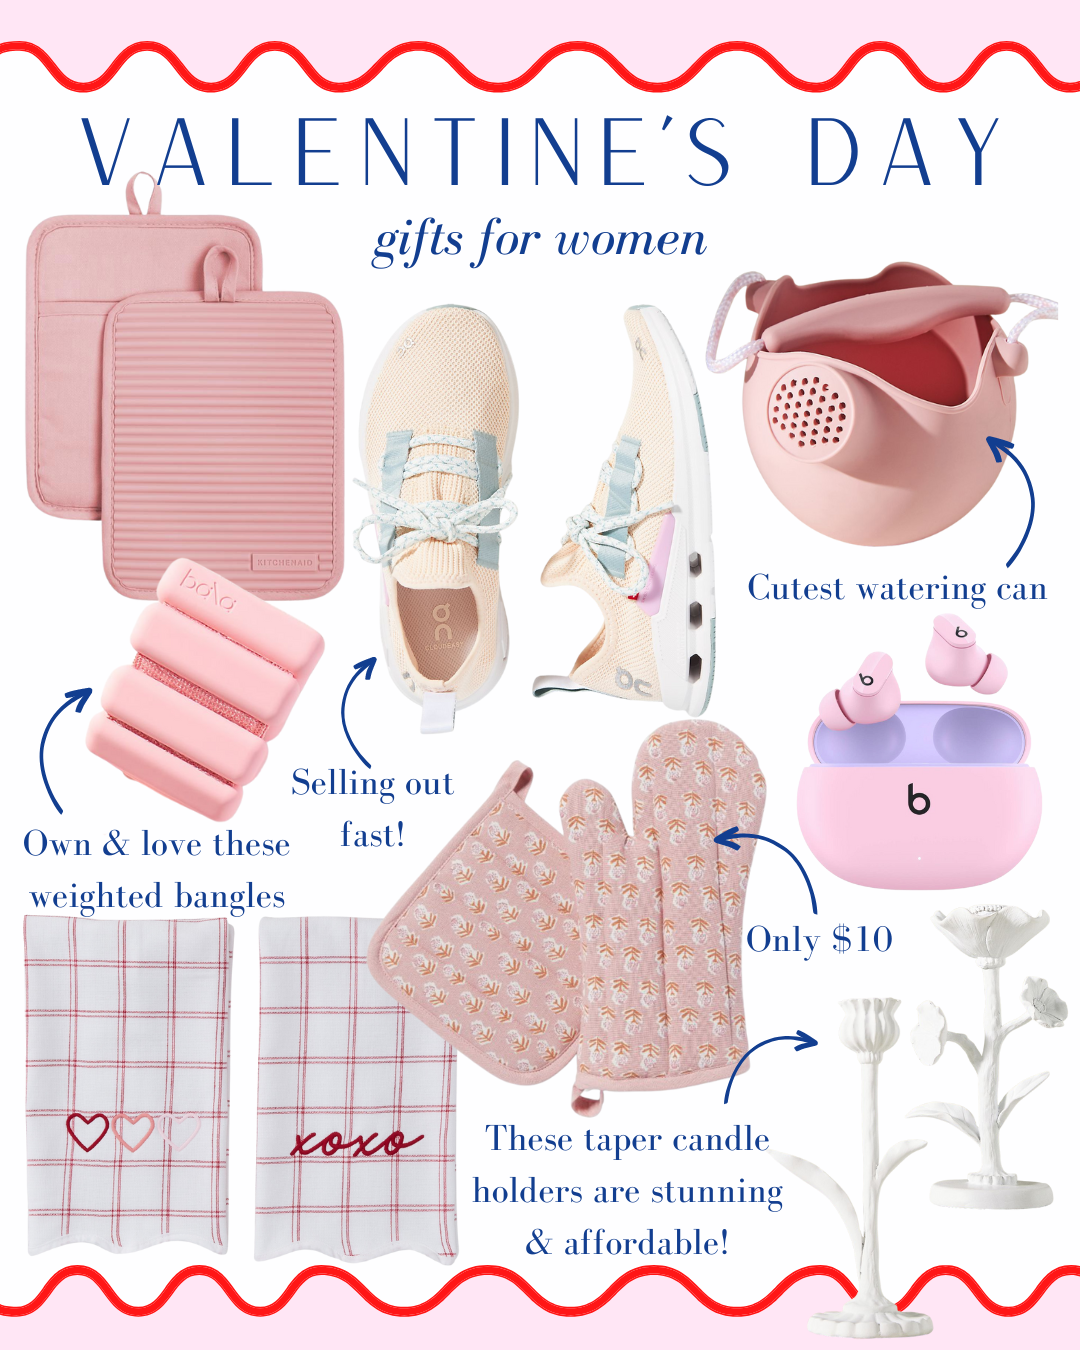 Valentine's Day gifts for mom, Valentine's day gifts for family, Valentine's Day gift ideas for mom, Valentine's gifts for women, Valentine's gifts for her 